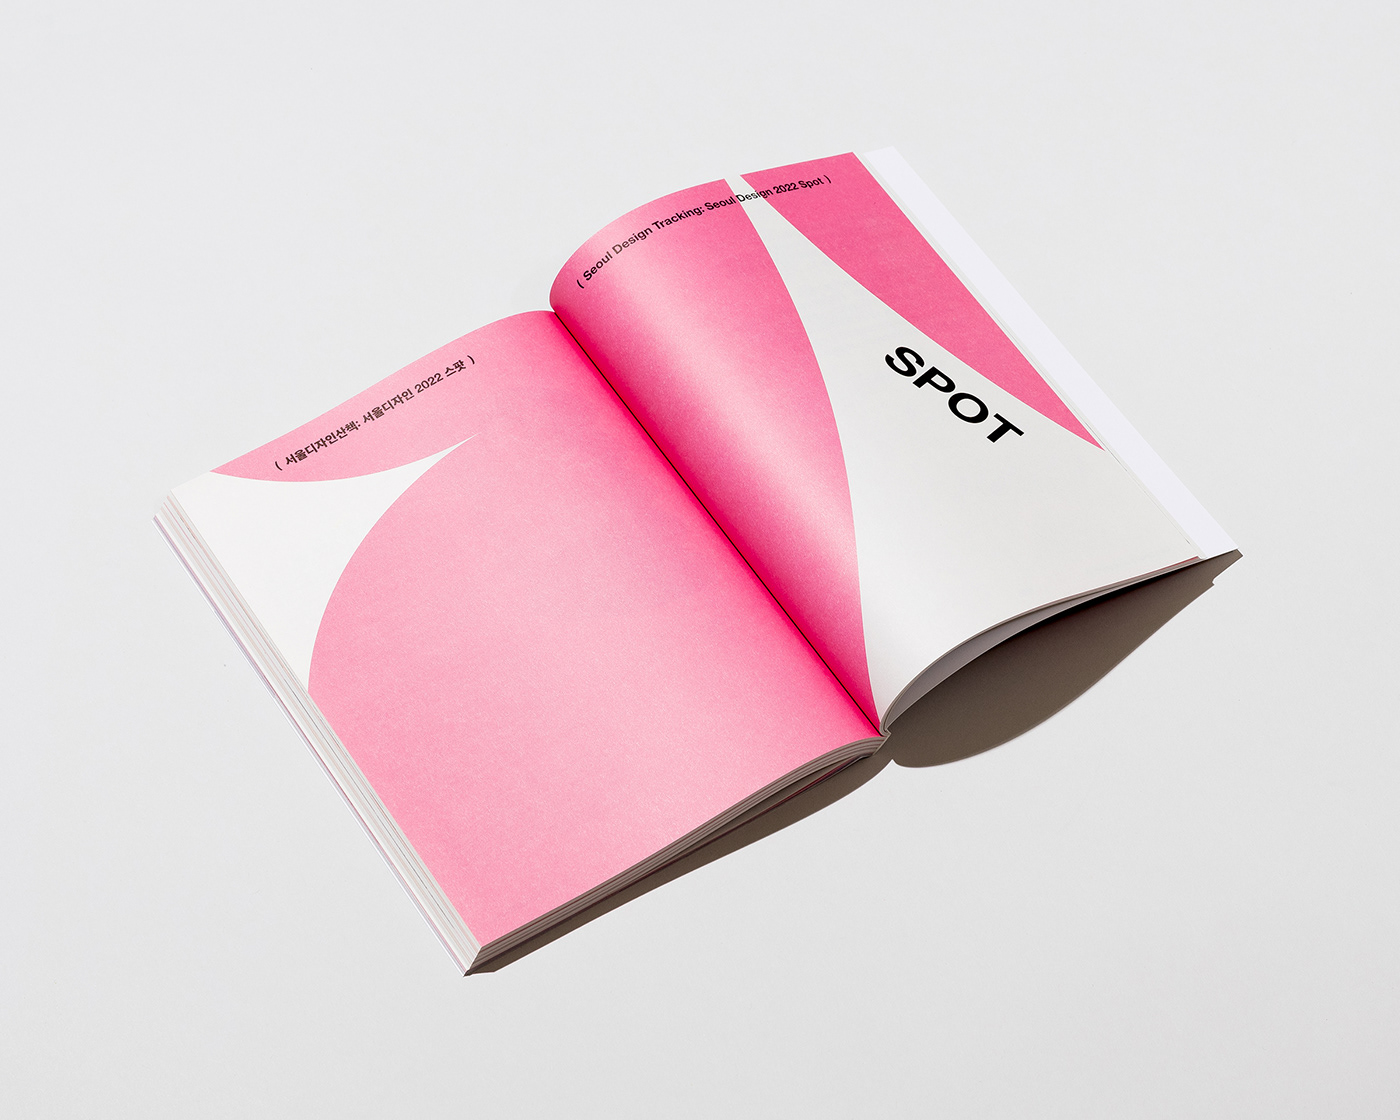 Archive book chuigraf DDP eco-friendly Exhibition  mice seoul Seoul design 2022 typography  